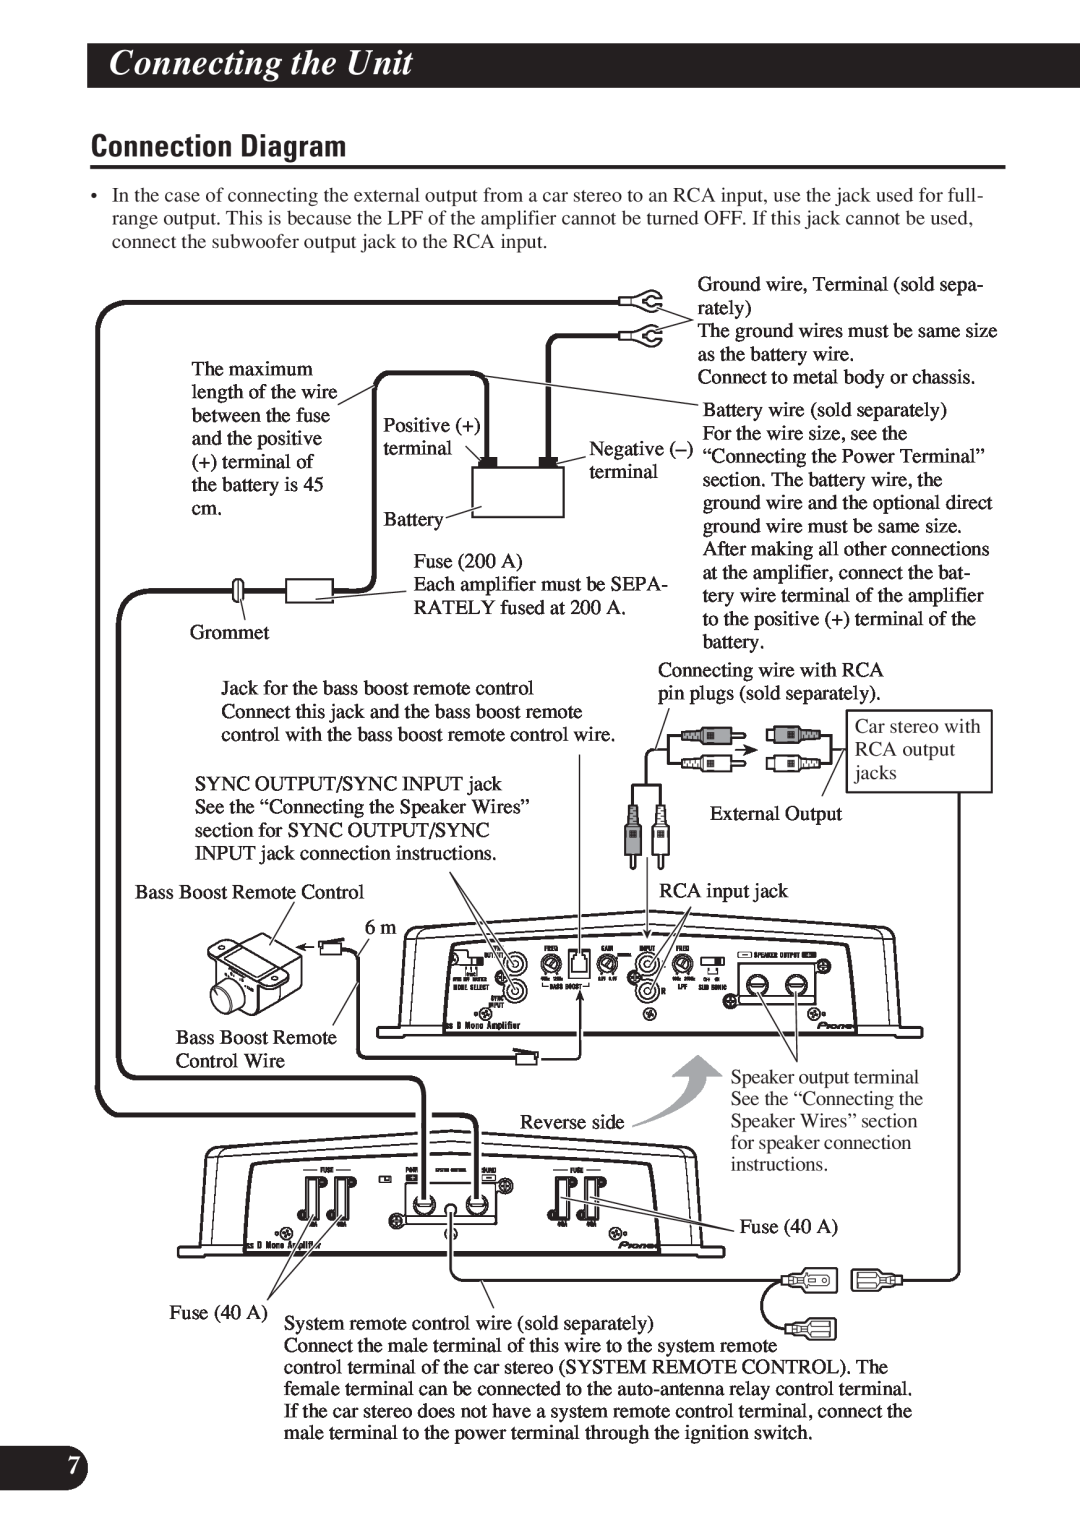 Pioneer D1200SPL owner manual Connection Diagram, Connecting the Unit 